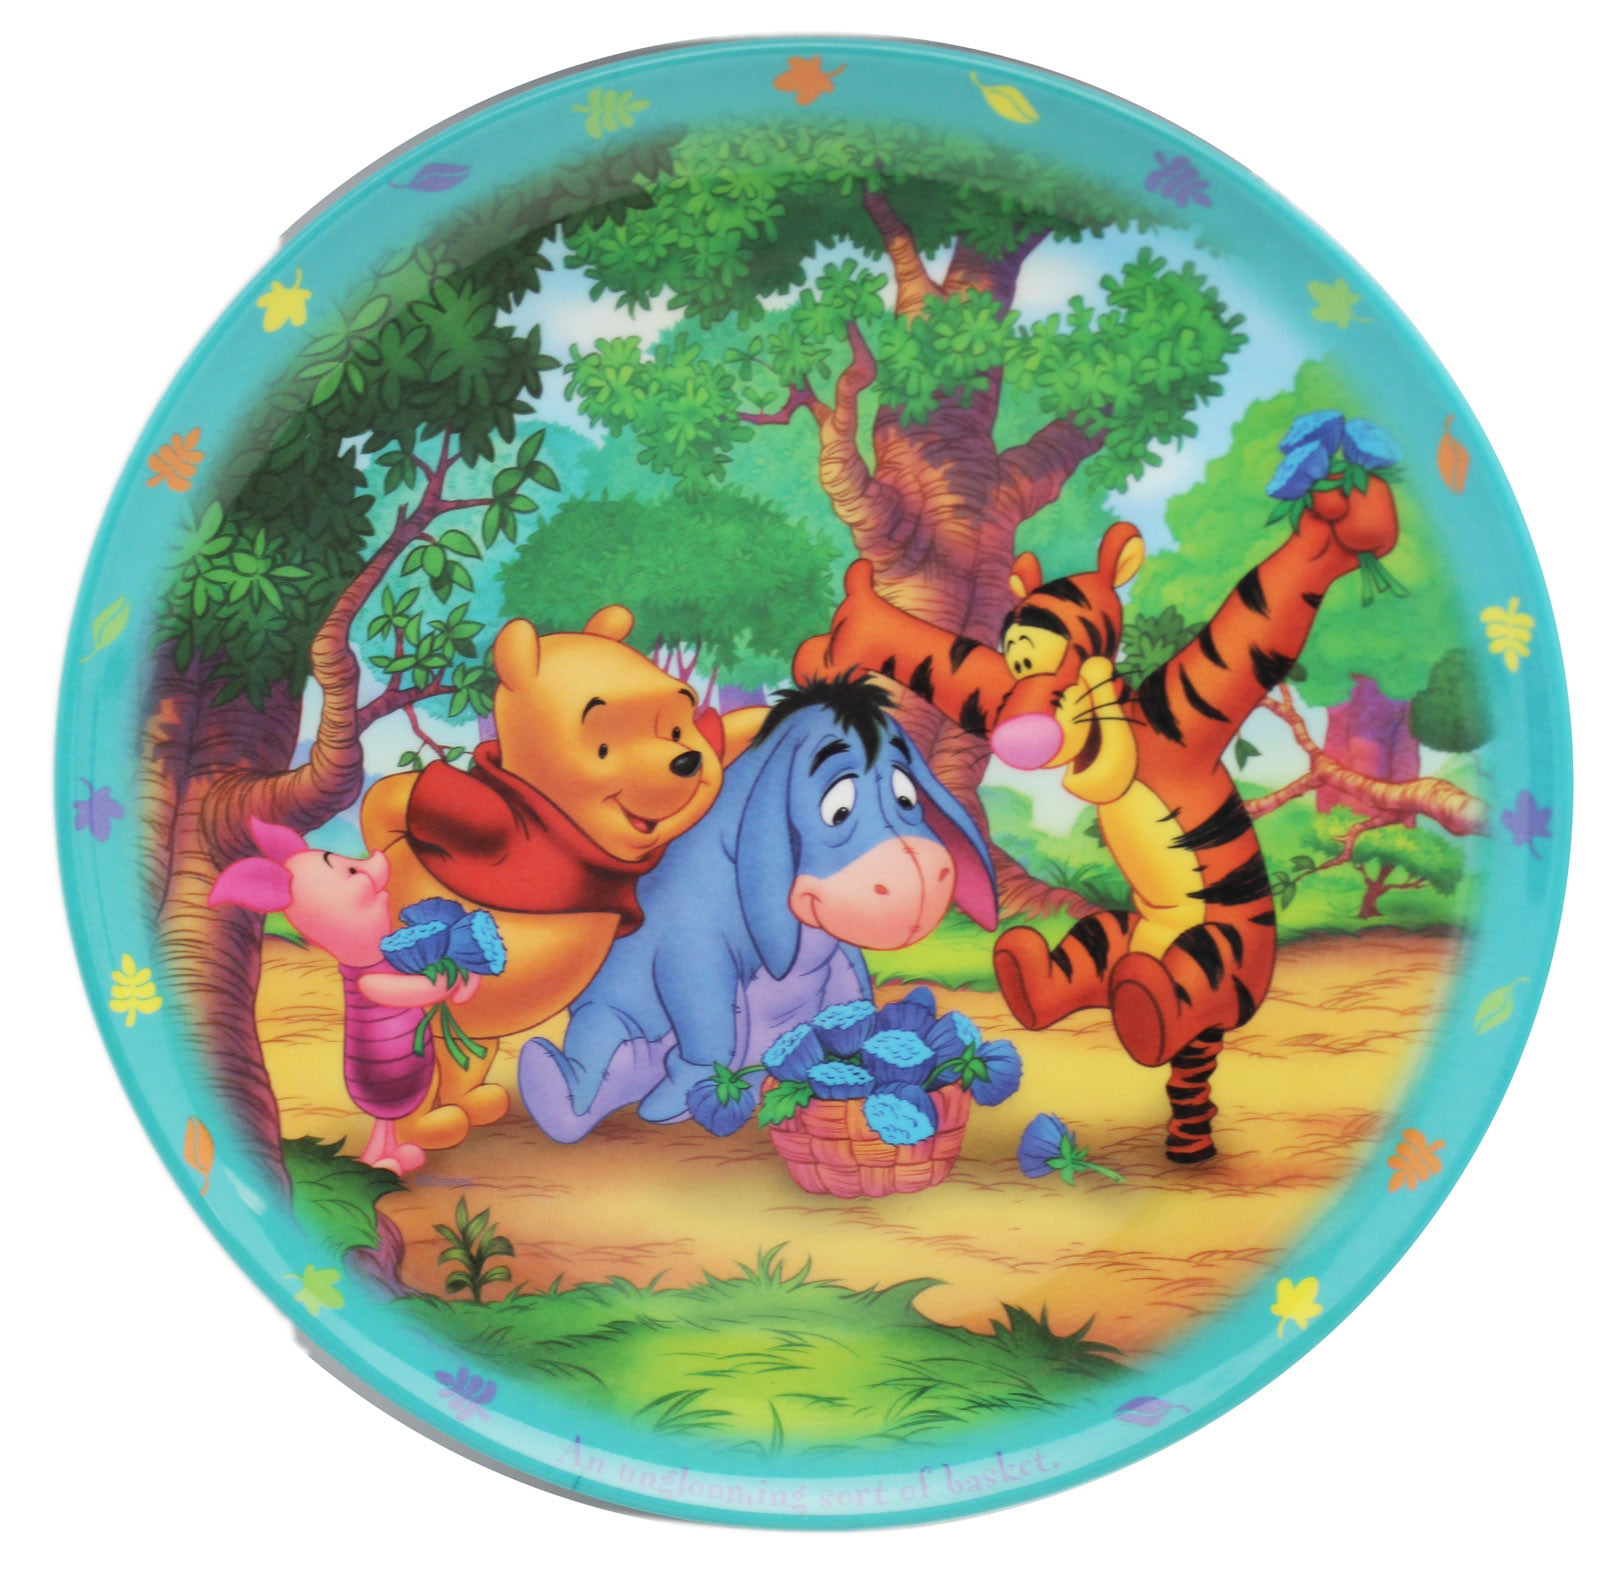 Winnie The Pooh Melamine 3 Section Childrens Dinner/Lunch/Breakfast Plate Winnie The Pooh Makes Mealtime Fun